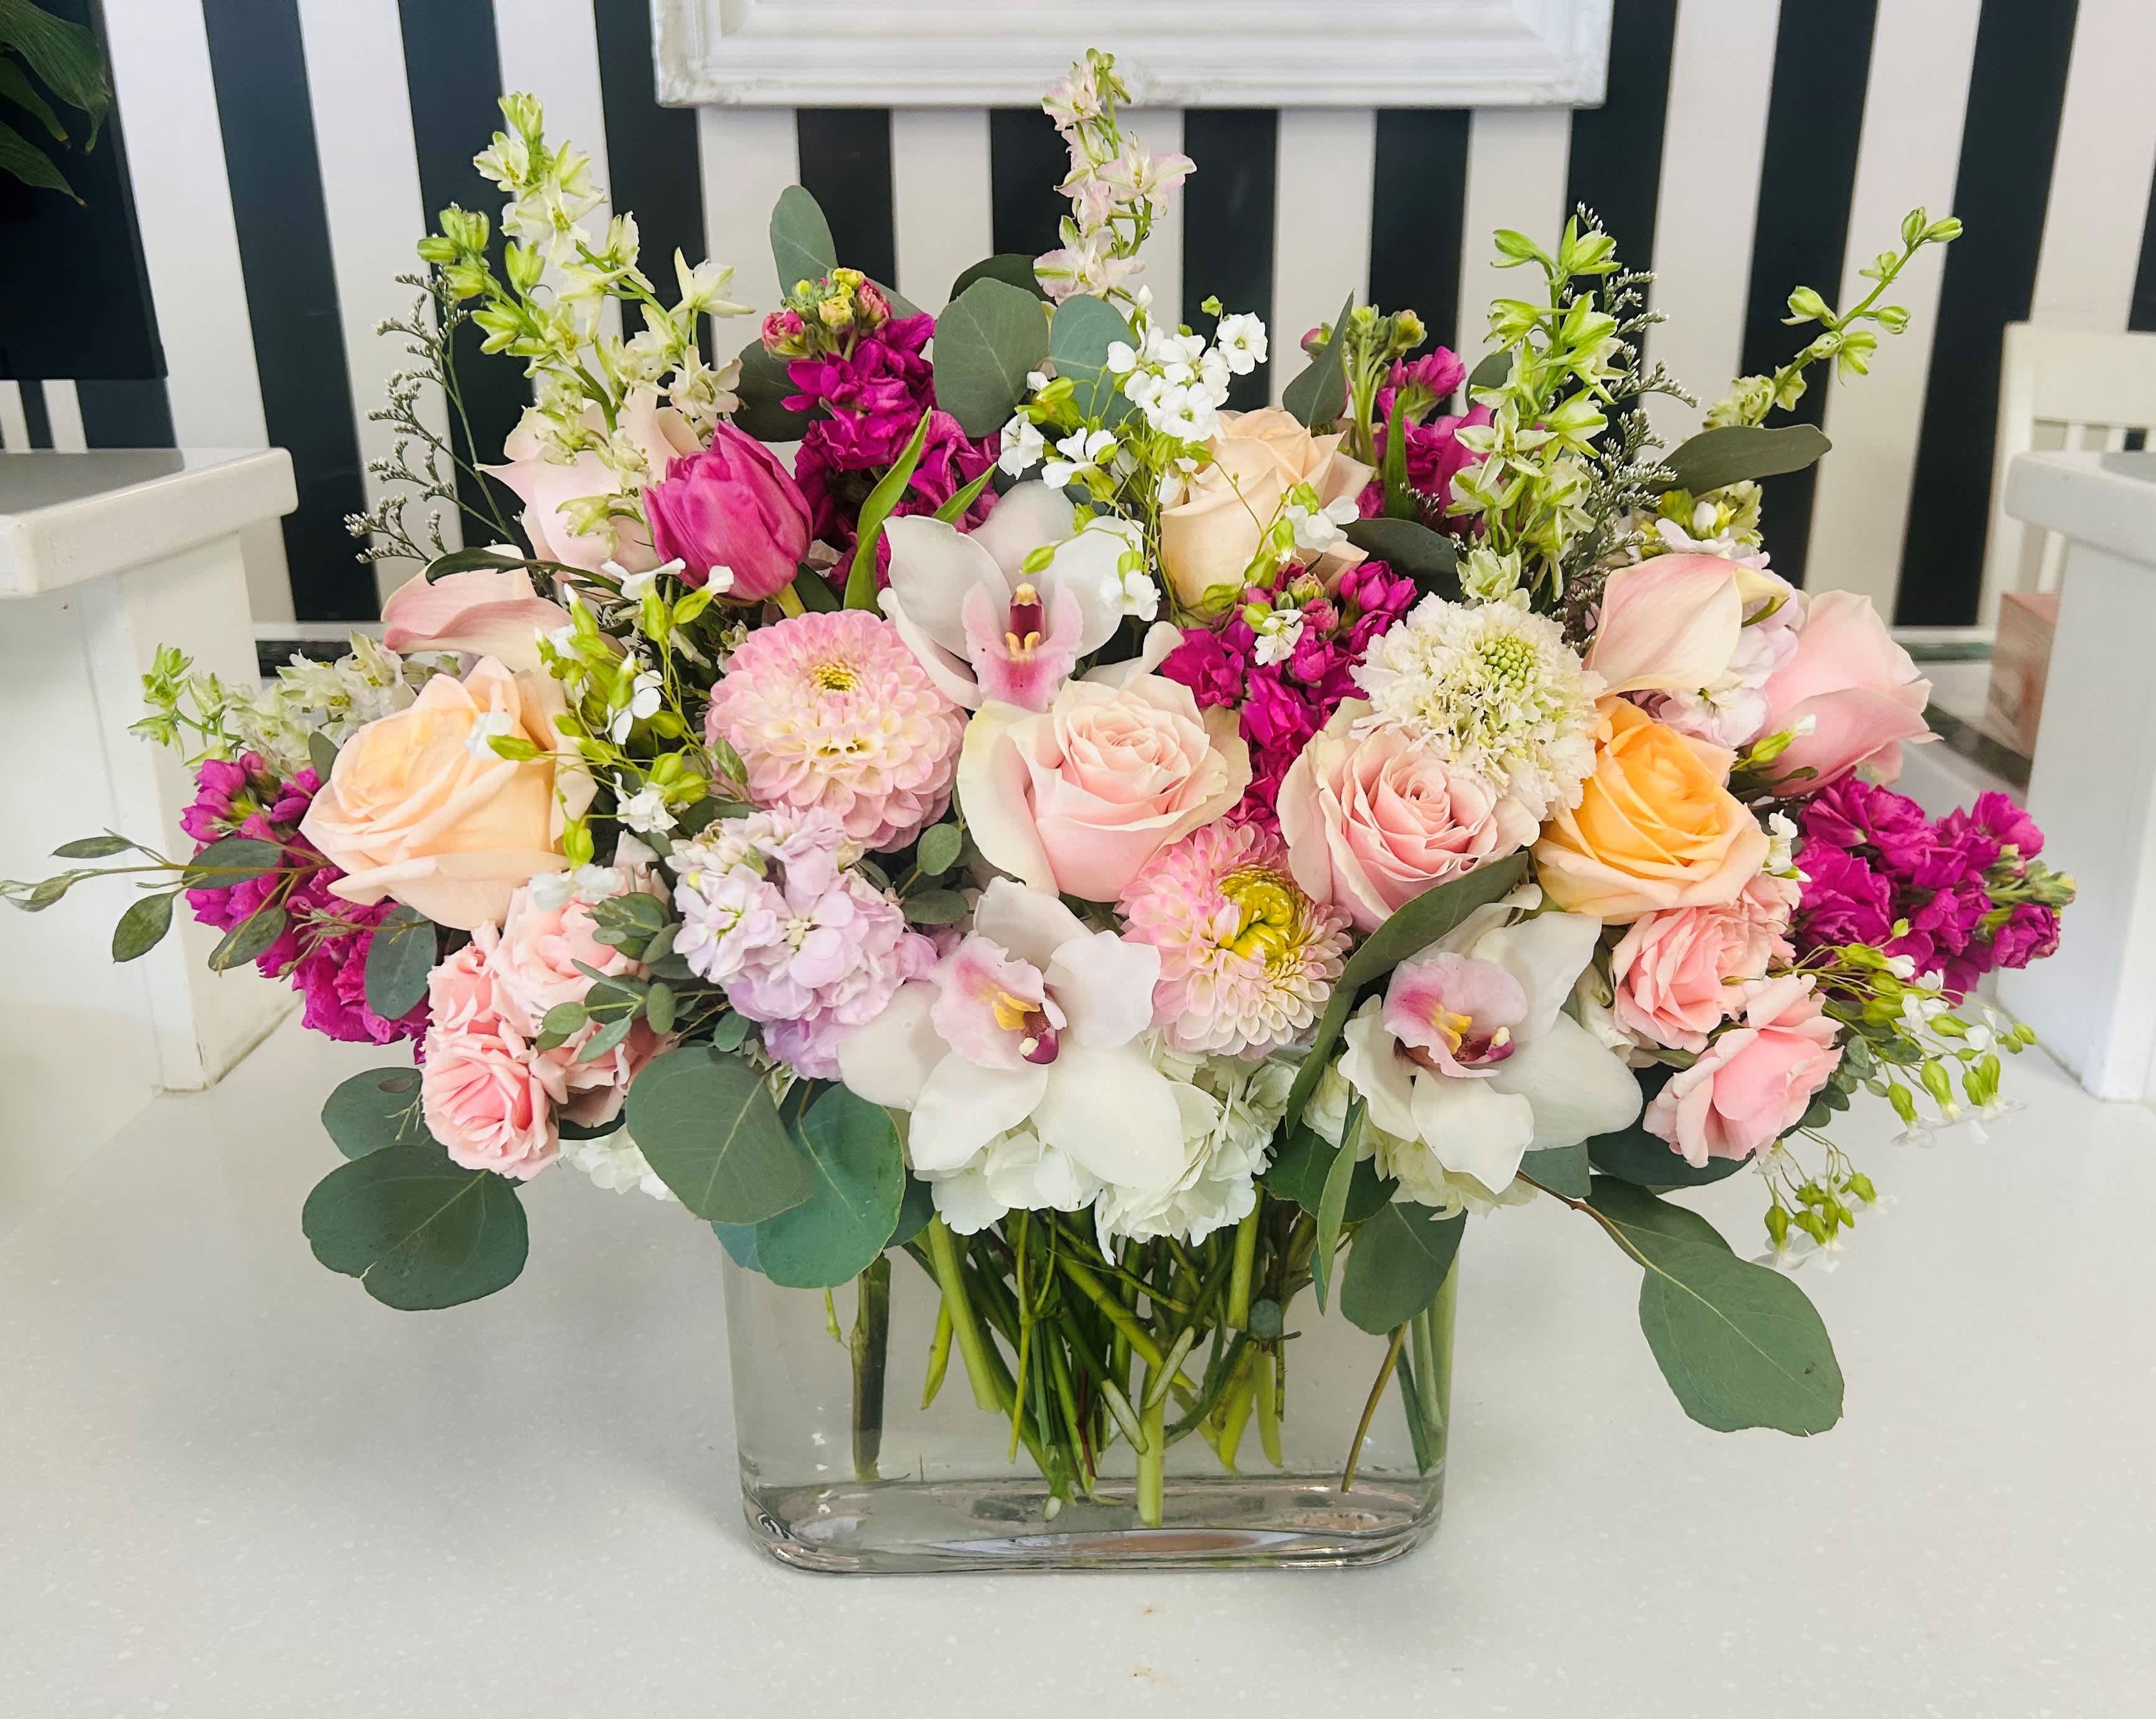 Garden of Love - This beautiful arrangement is filled with premium blooms with a color palate of, light pinks, medium pinks, peach, whites and creams. 